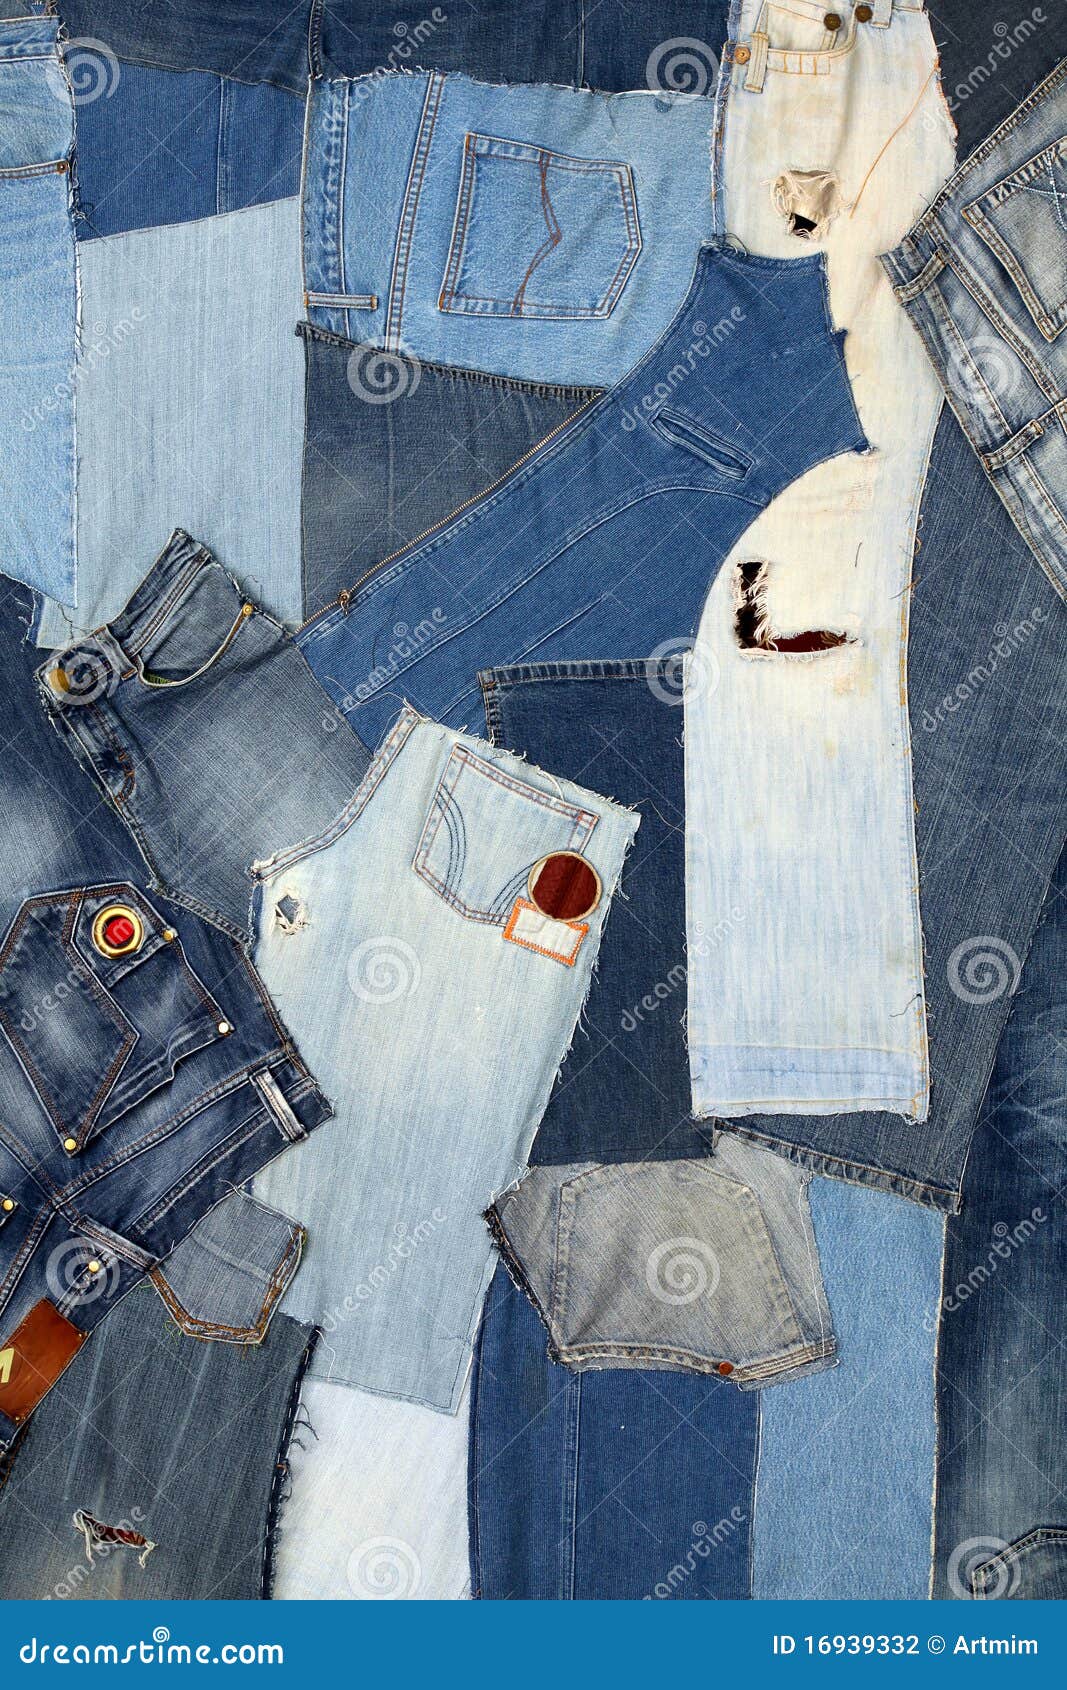 Abstract jeans background stock photo. Image of hole - 16939332